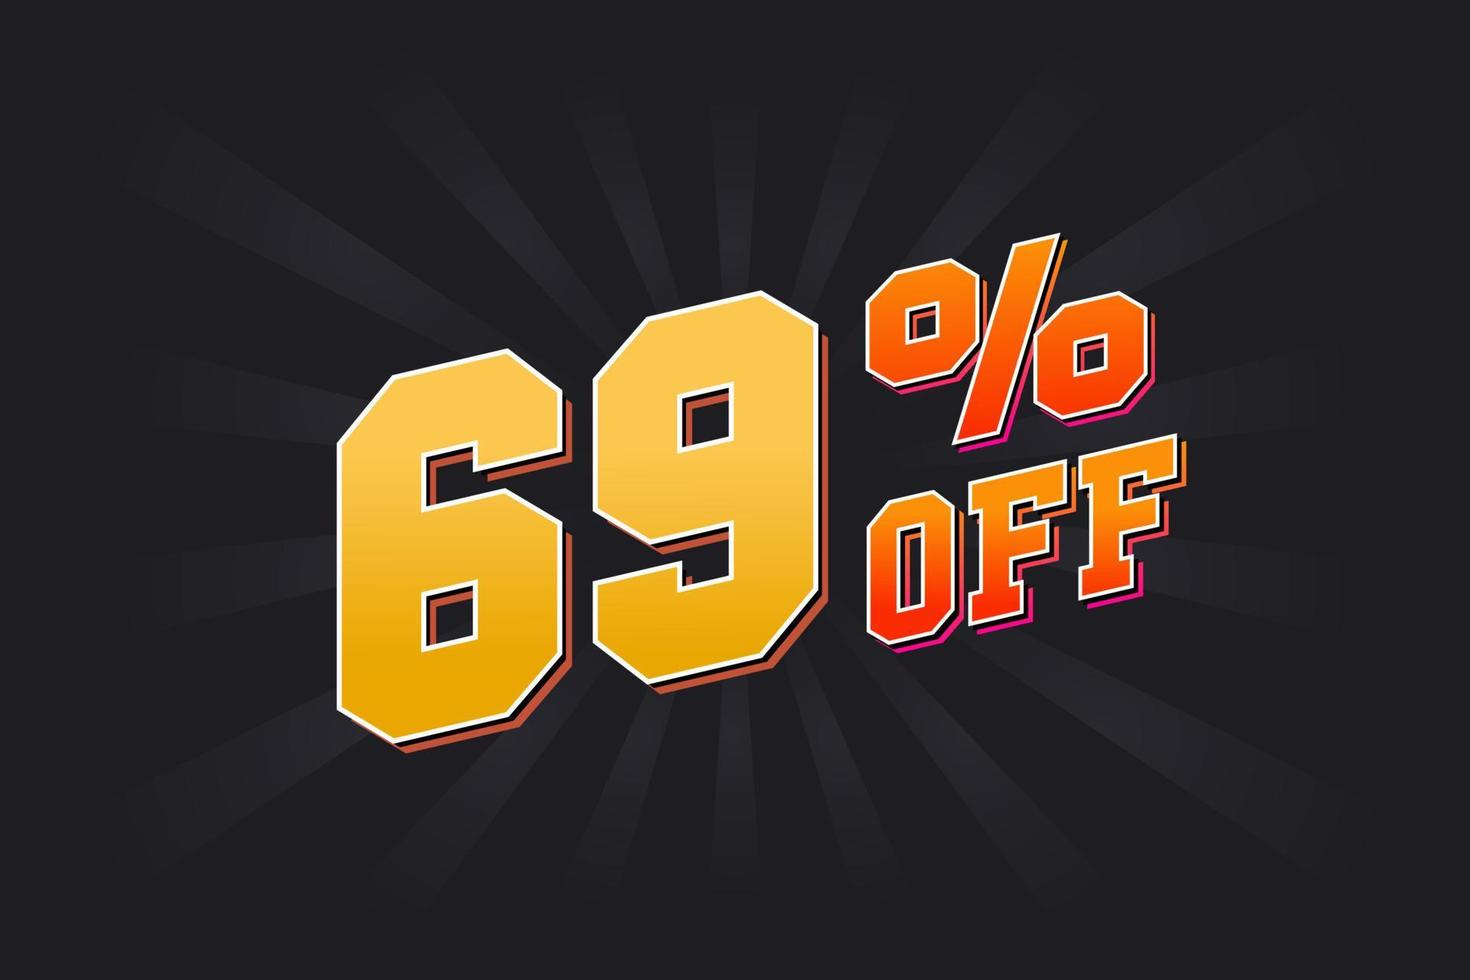 69 Percent off Special Discount Offer. 69 off Sale of advertising campaign vector graphics.